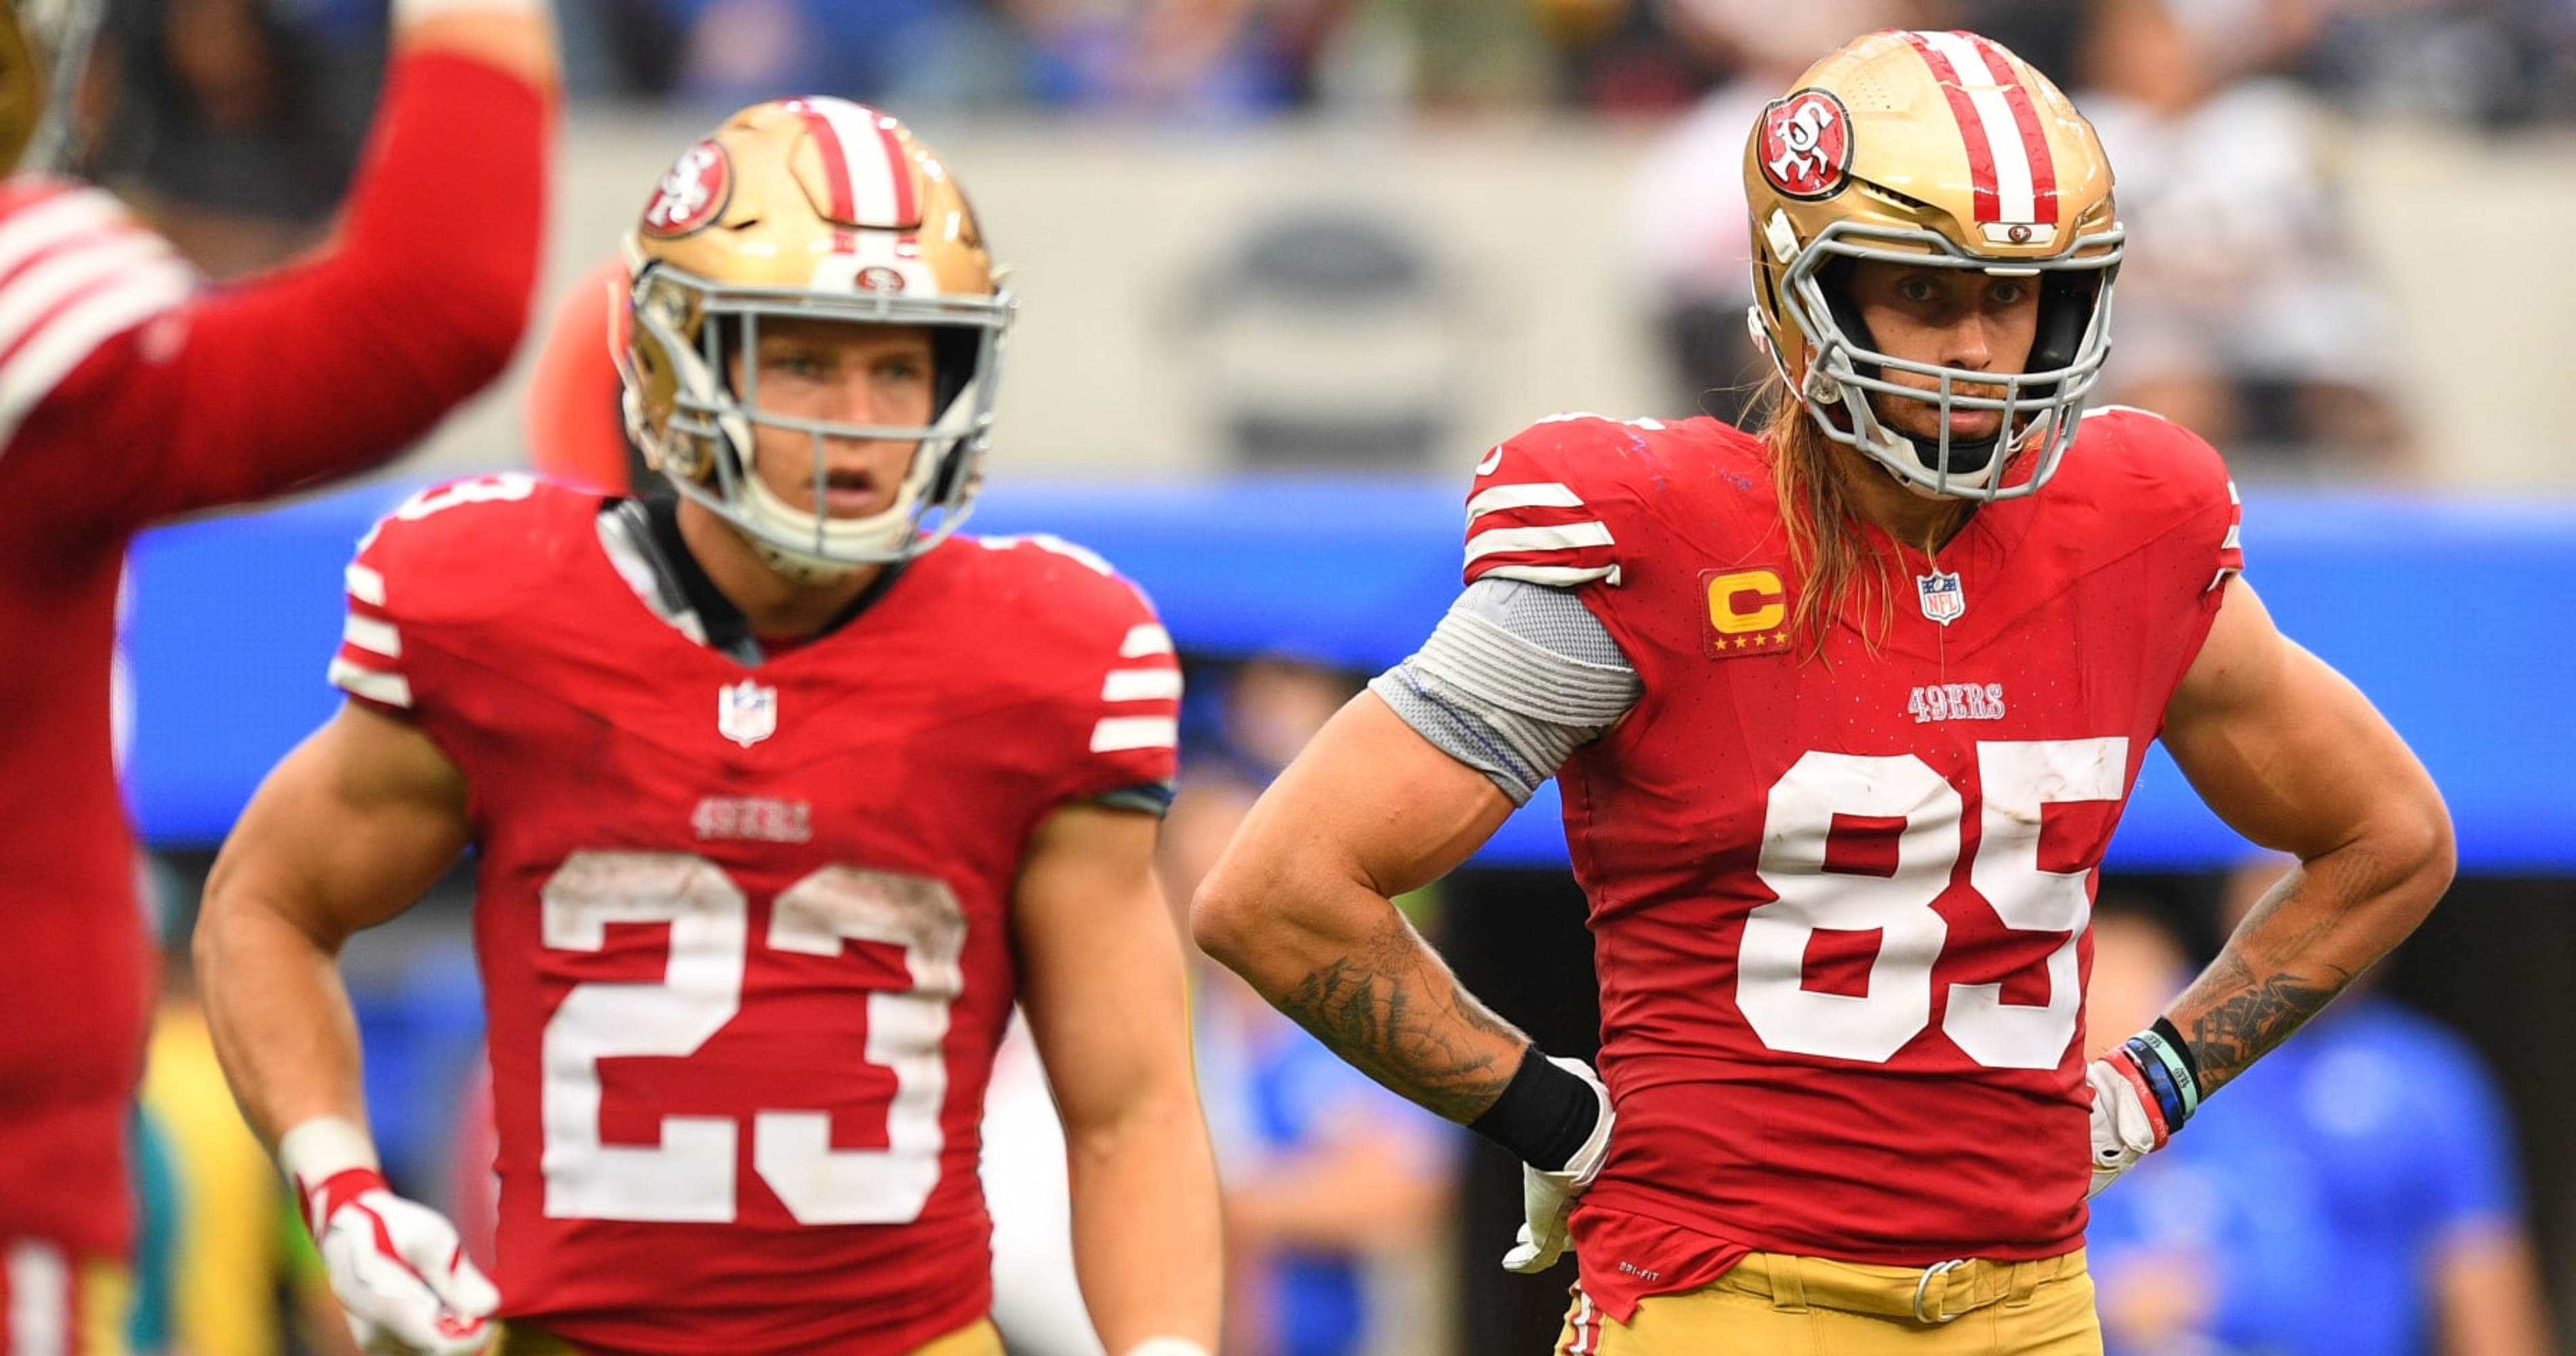 Giants vs. 49ers Picks, Lineup Tips for Daily Fantasy DraftKings for TNF